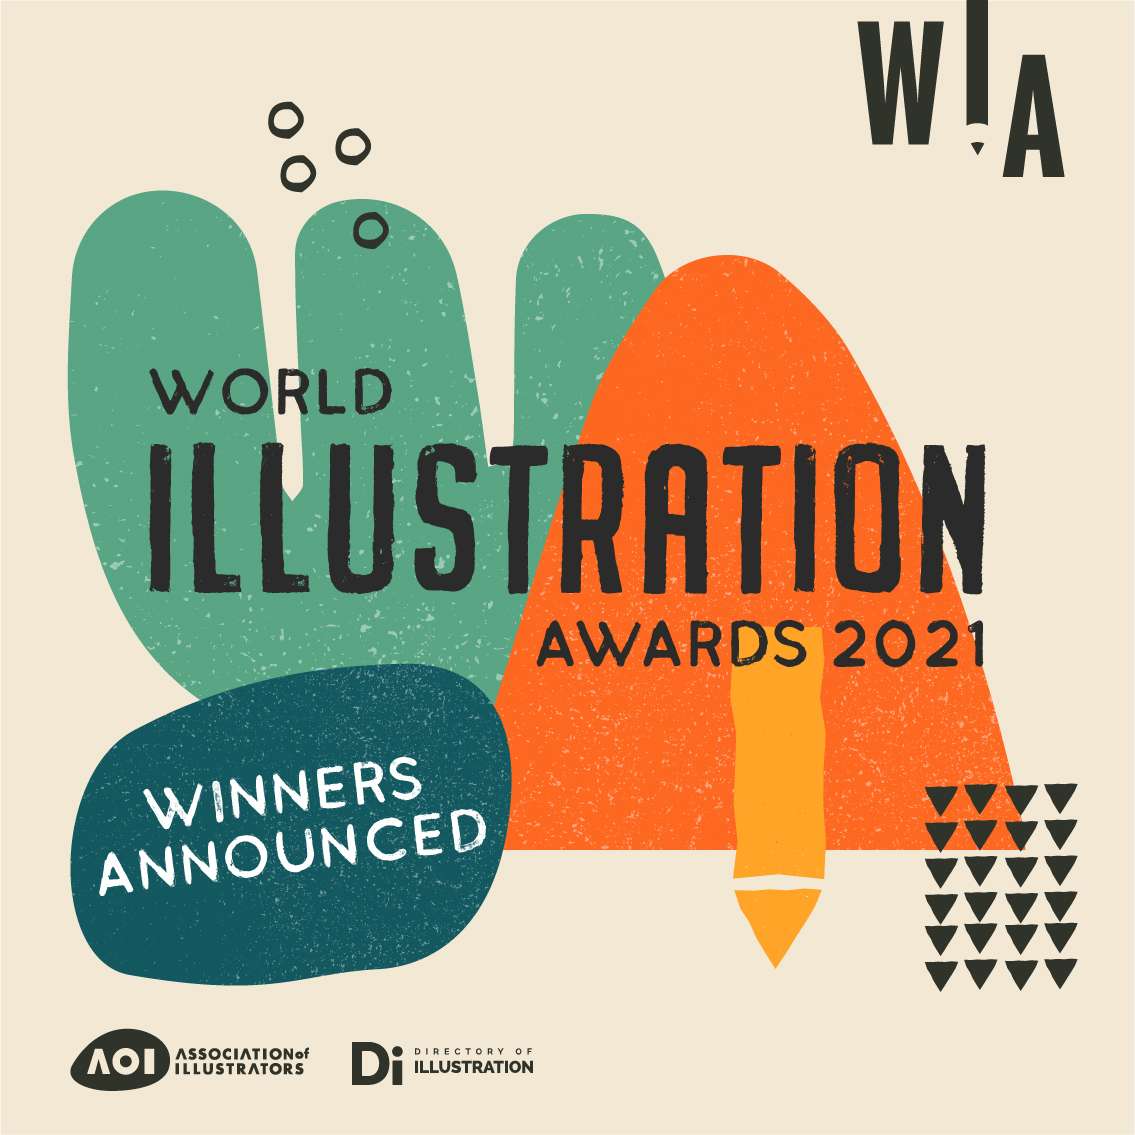 The World Illustration Awards 2021 winners are announced! The AOI